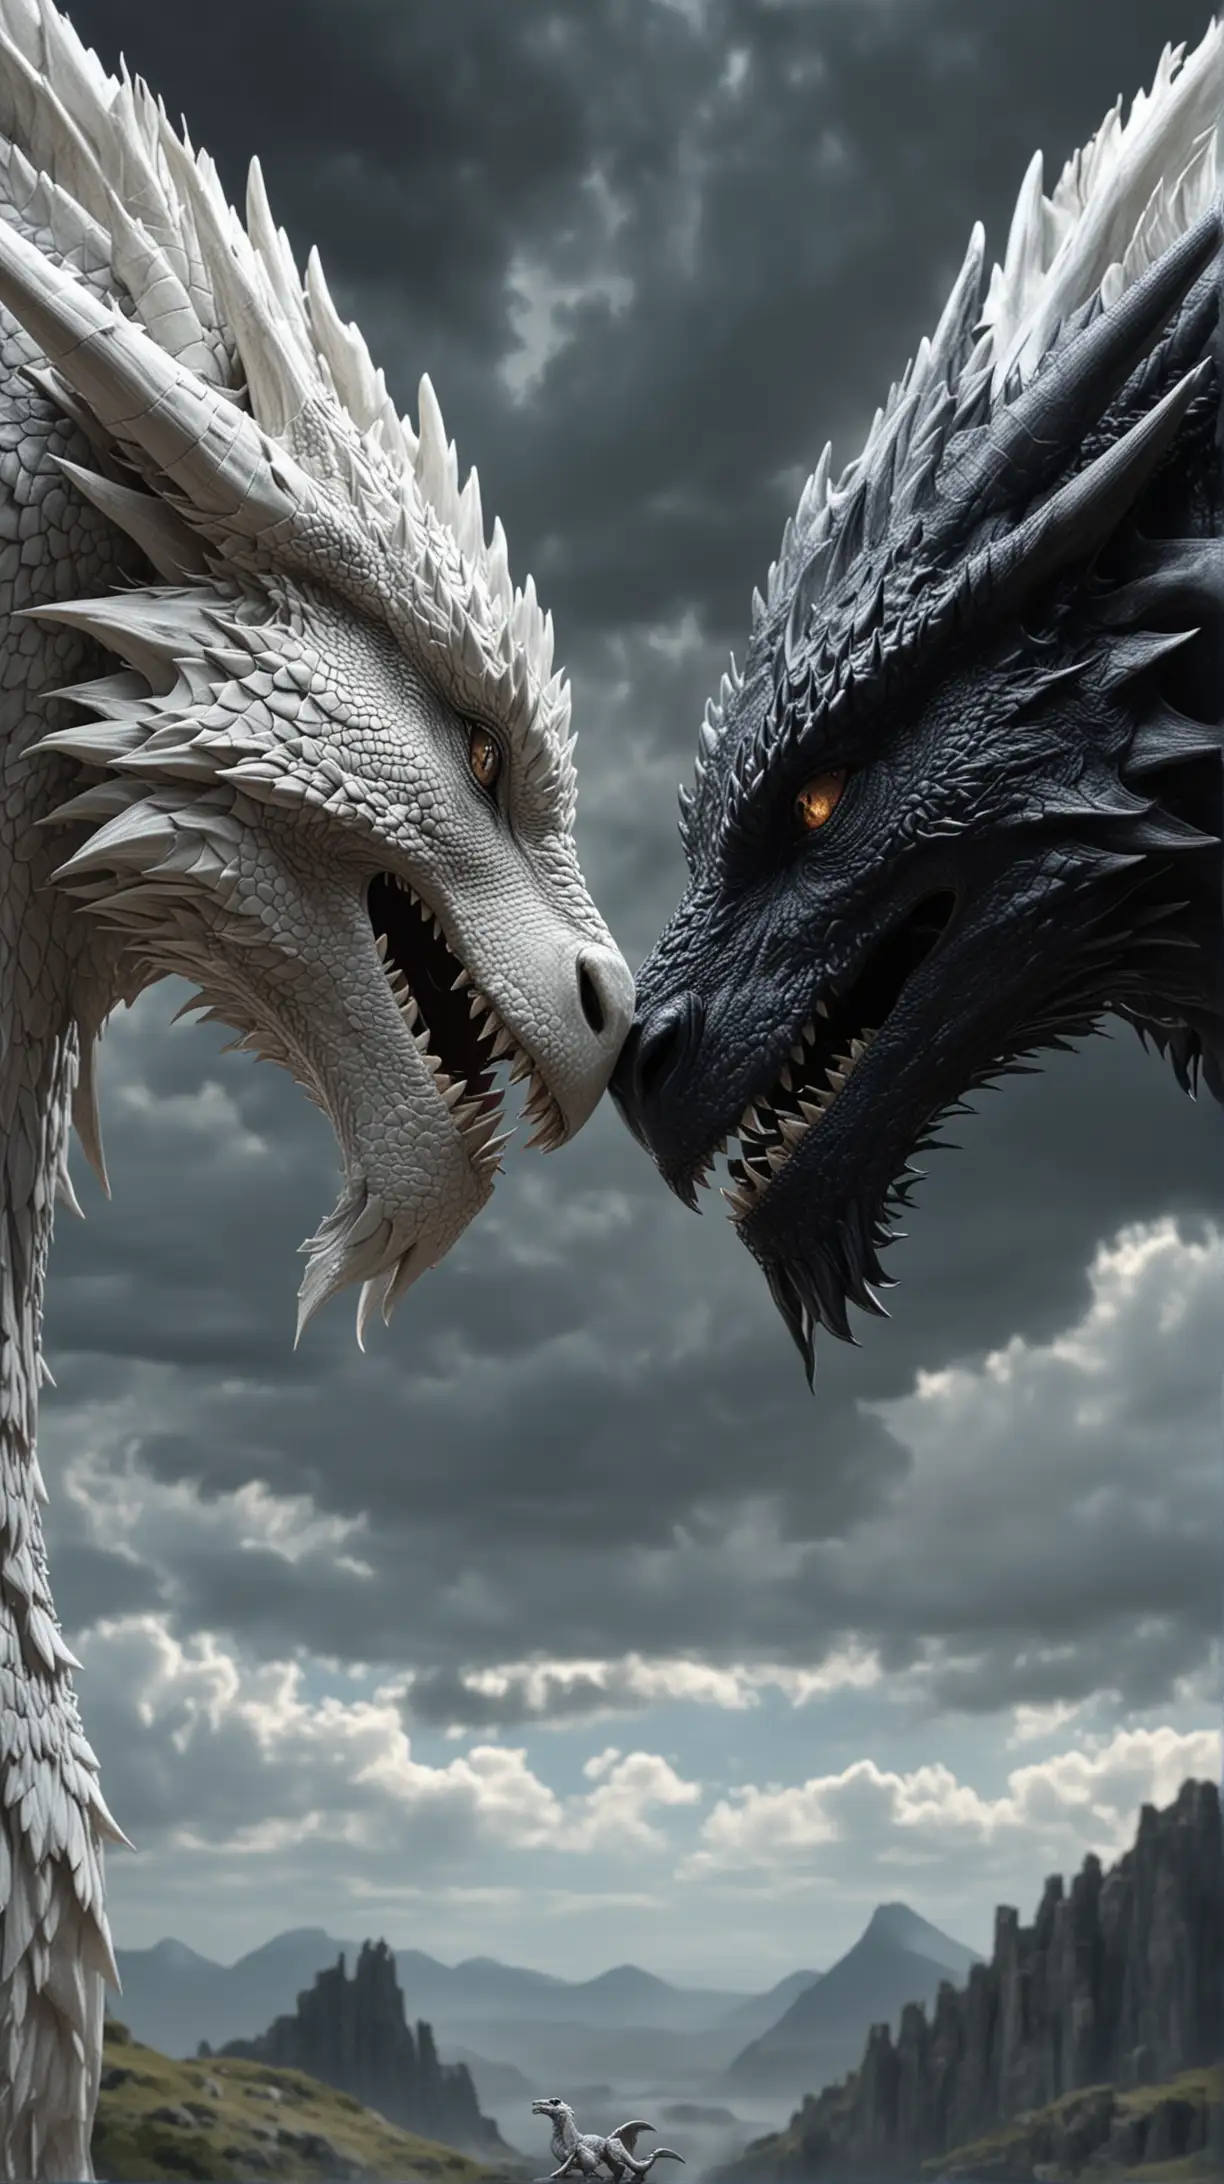 Majestic White and Black Dragons in Enchanted Love Affair